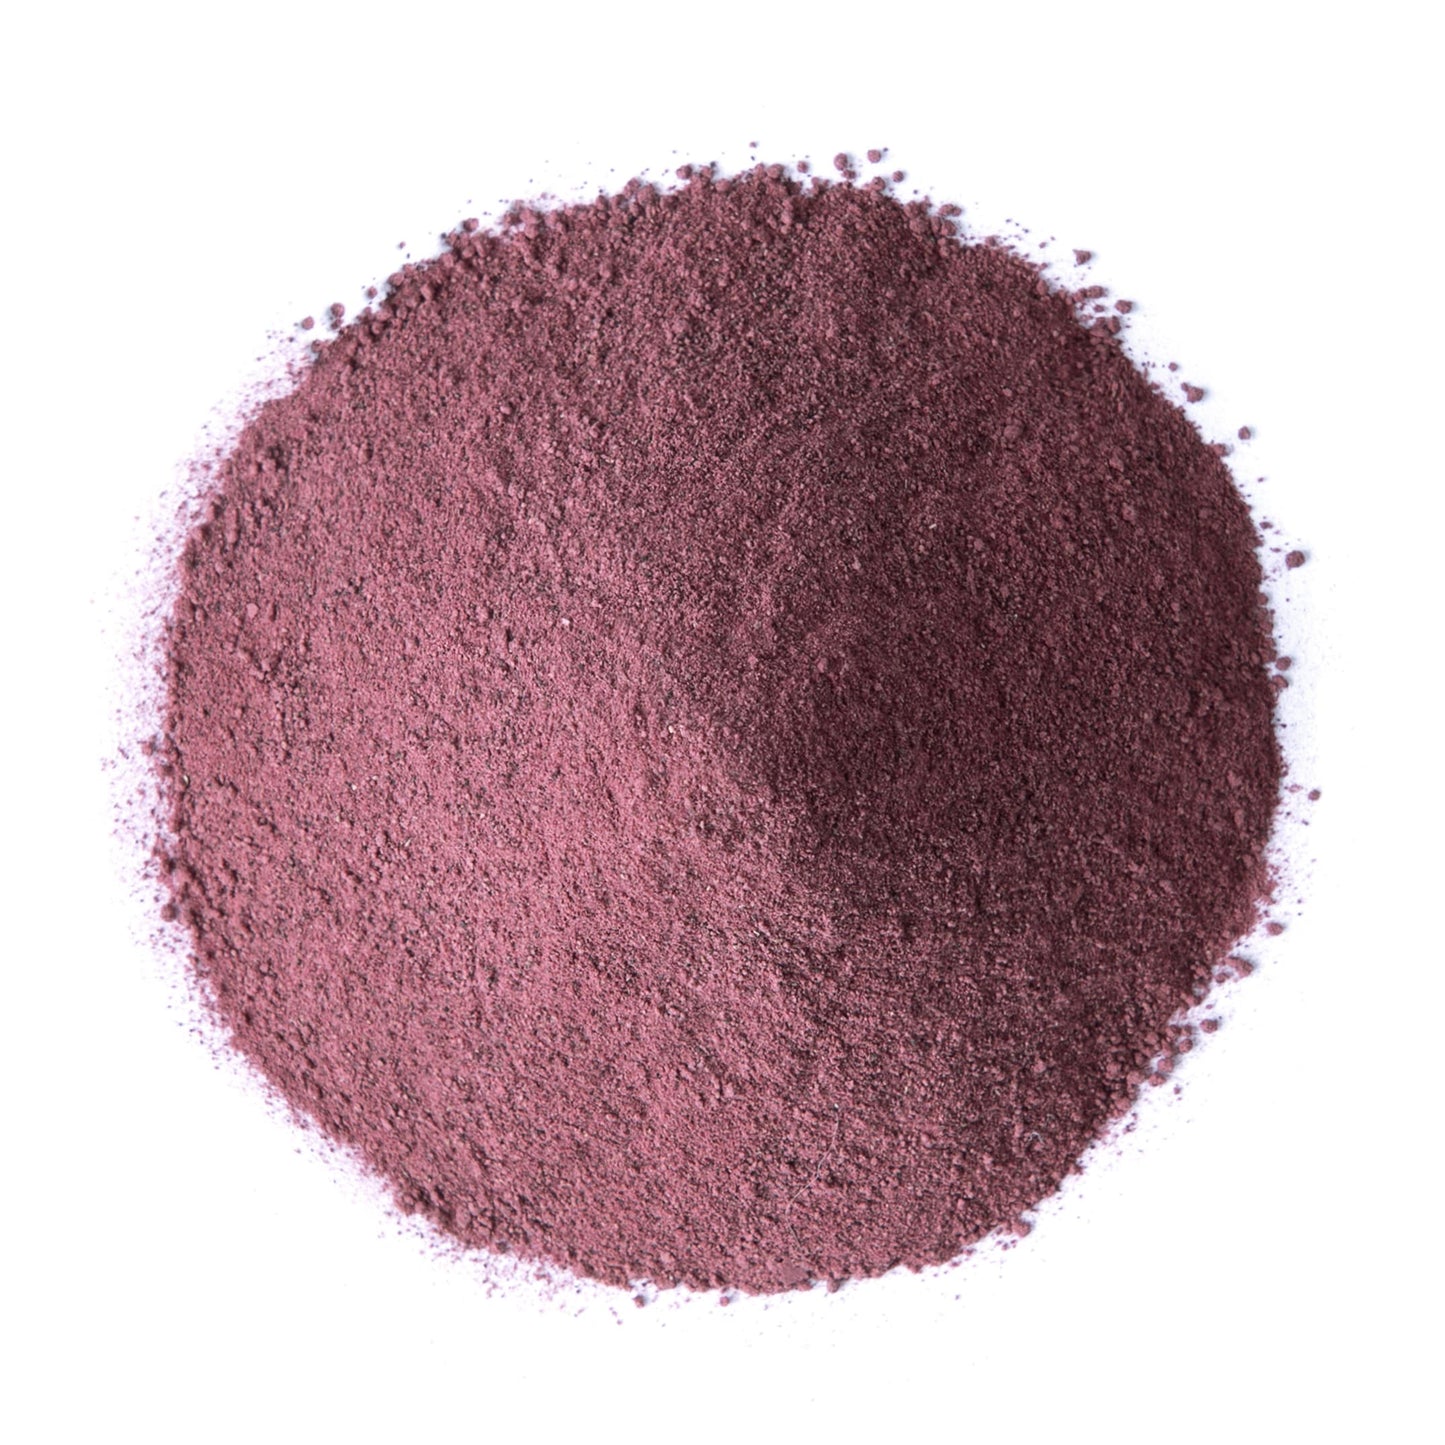 Mulberry Fruit Powder, X Pounds - Made from Raw Dried Berries, Unsulfured, Vegan, Bulk, Great for Baking, Juices, Smoothies, Yogurts, and Instant Breakfast Drinks, No Sulphites - by Food to Live